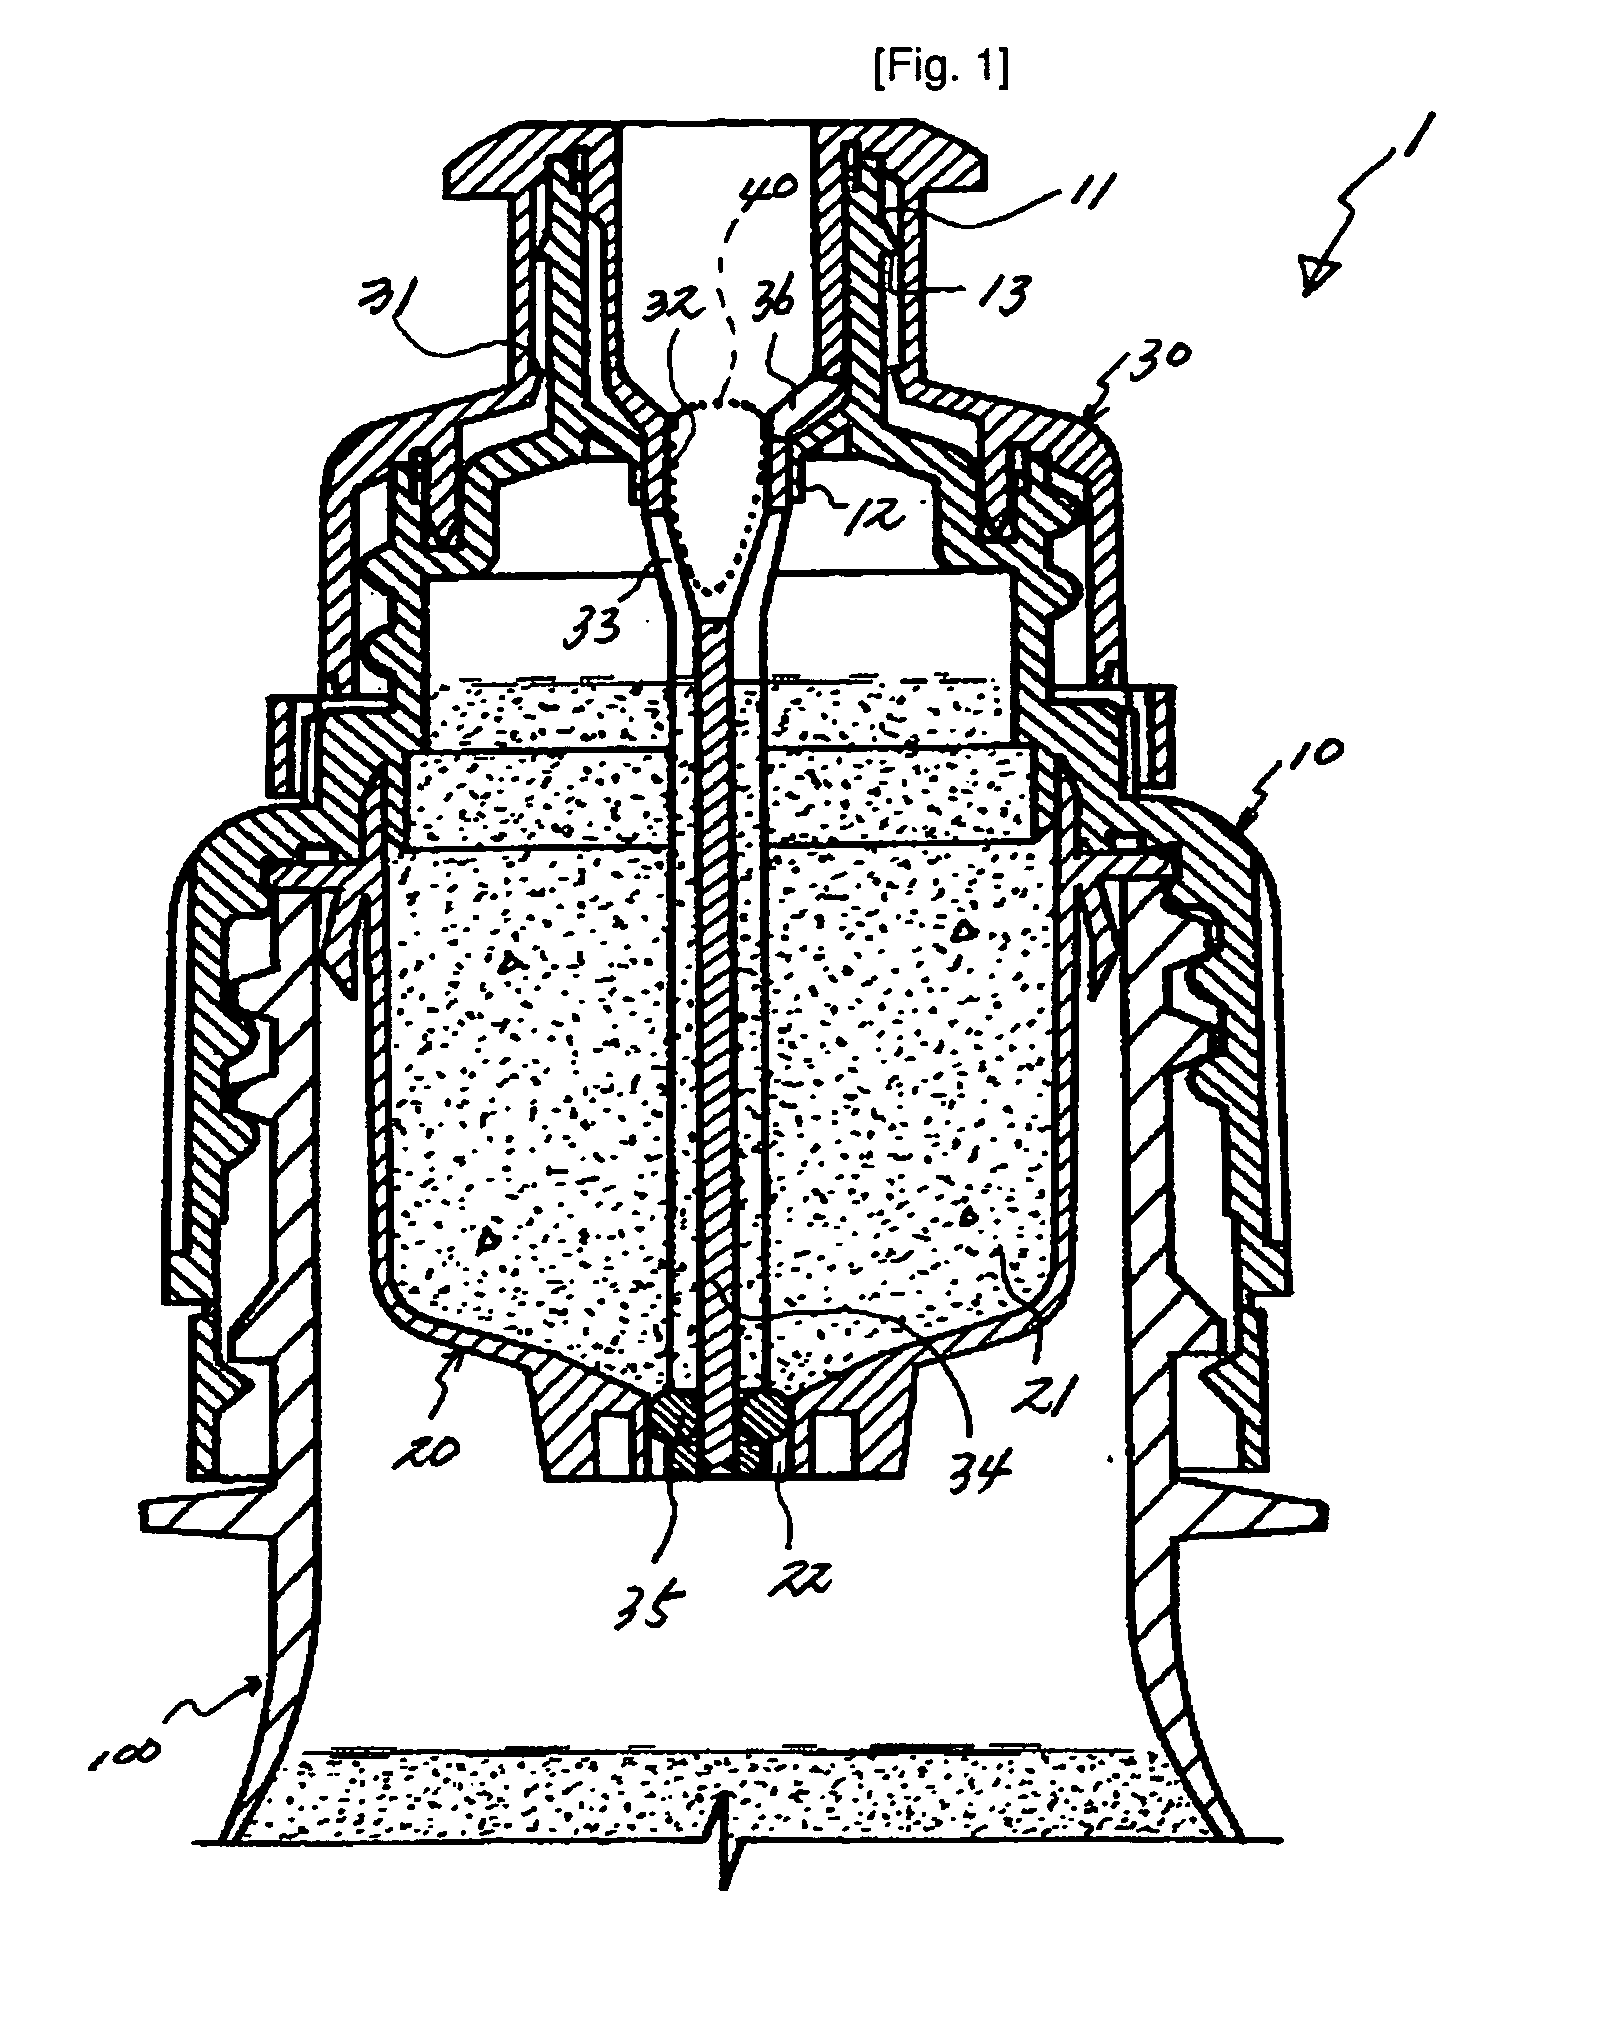 Cap assembly having storage chamber for secondary material with inseparable working member